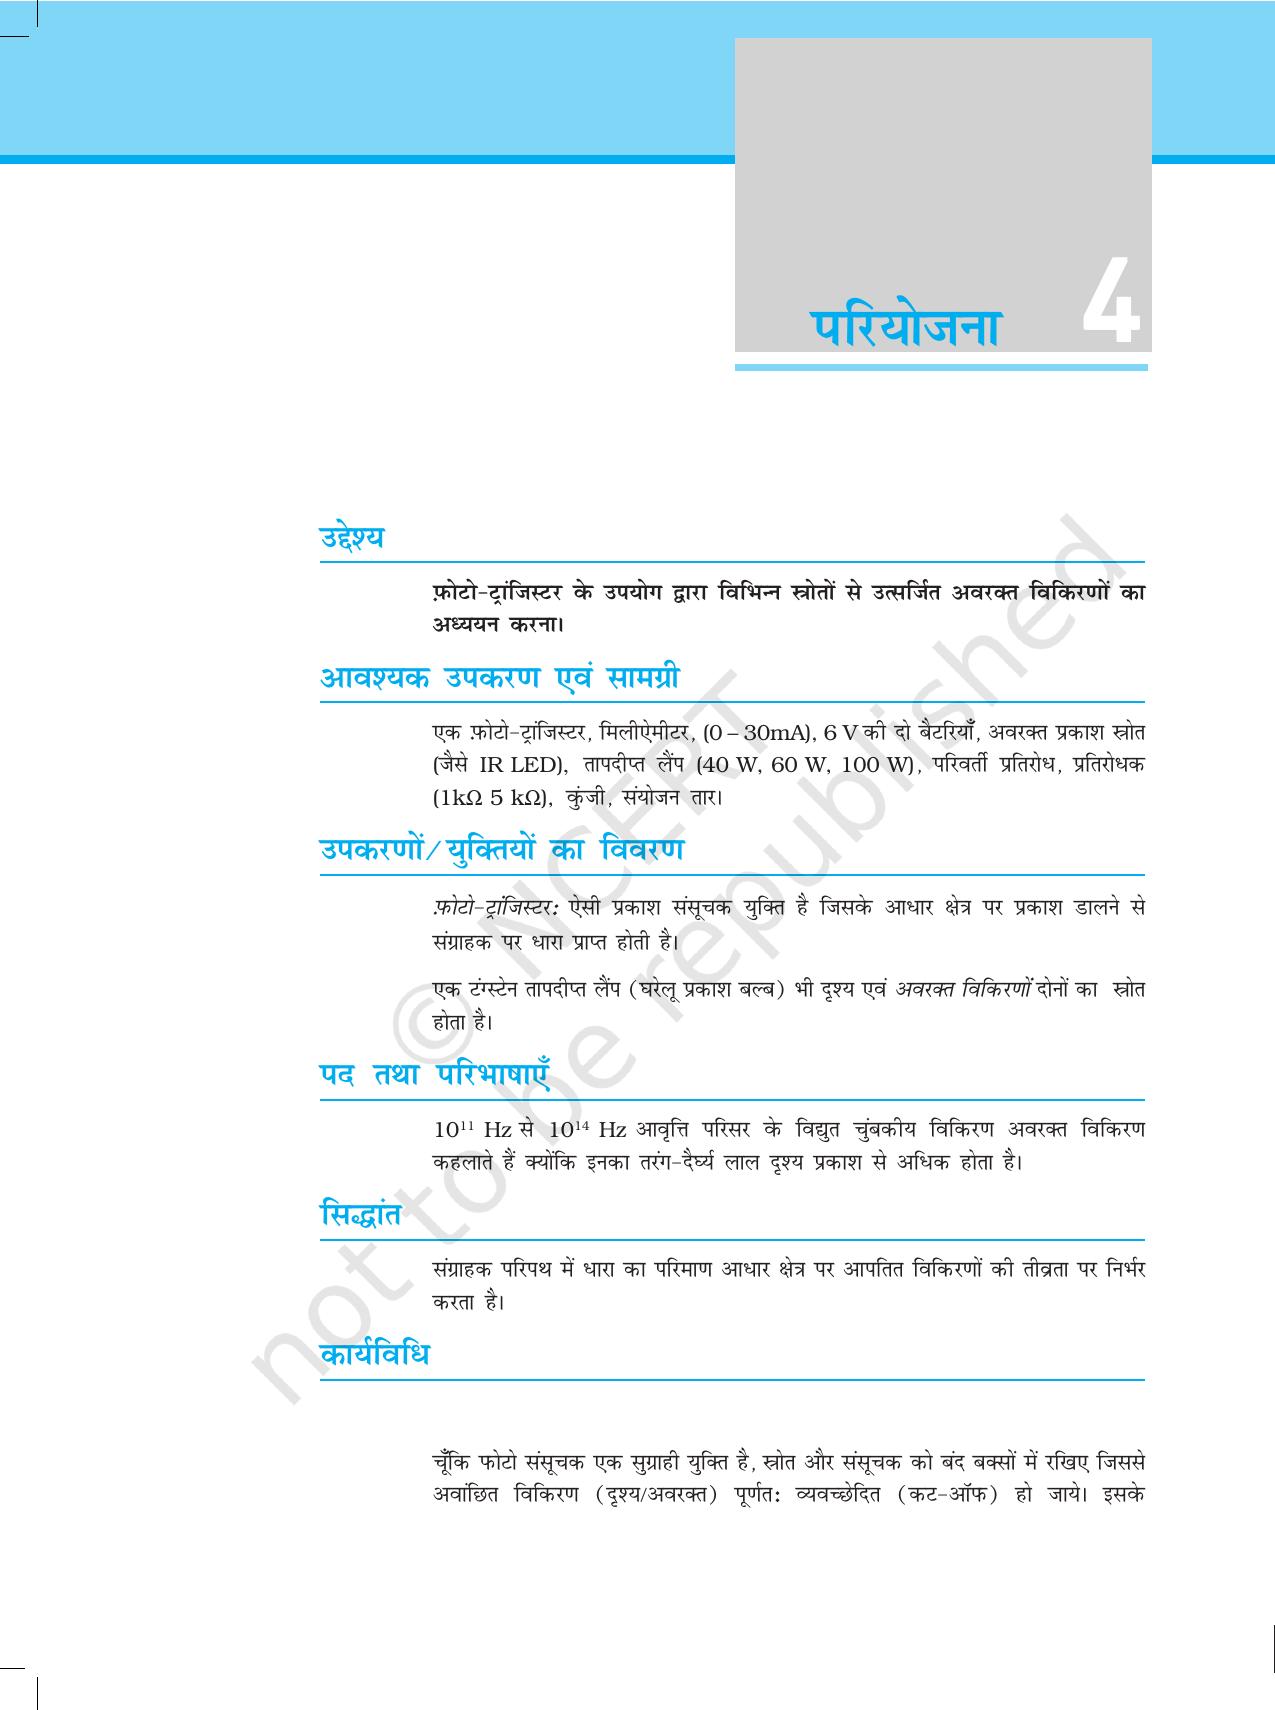 NCERT Laboratory Manuals for Class XII भौतिकी - परियोजना (1 - 7) - Page 14